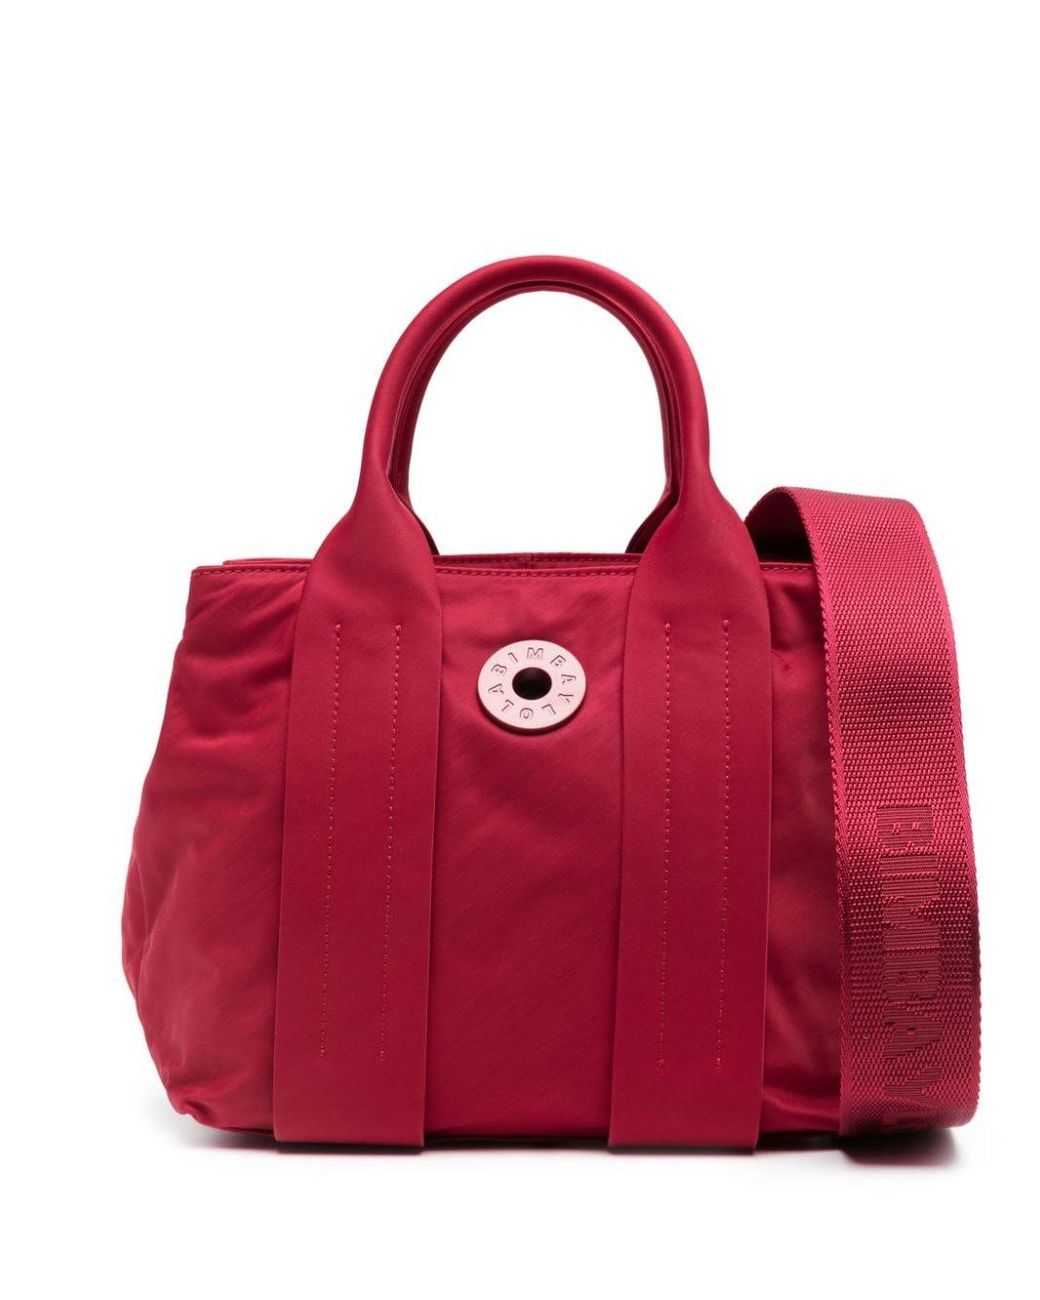 Bimba Y Lola Logo-plaque Zipped Tote Bag in Red